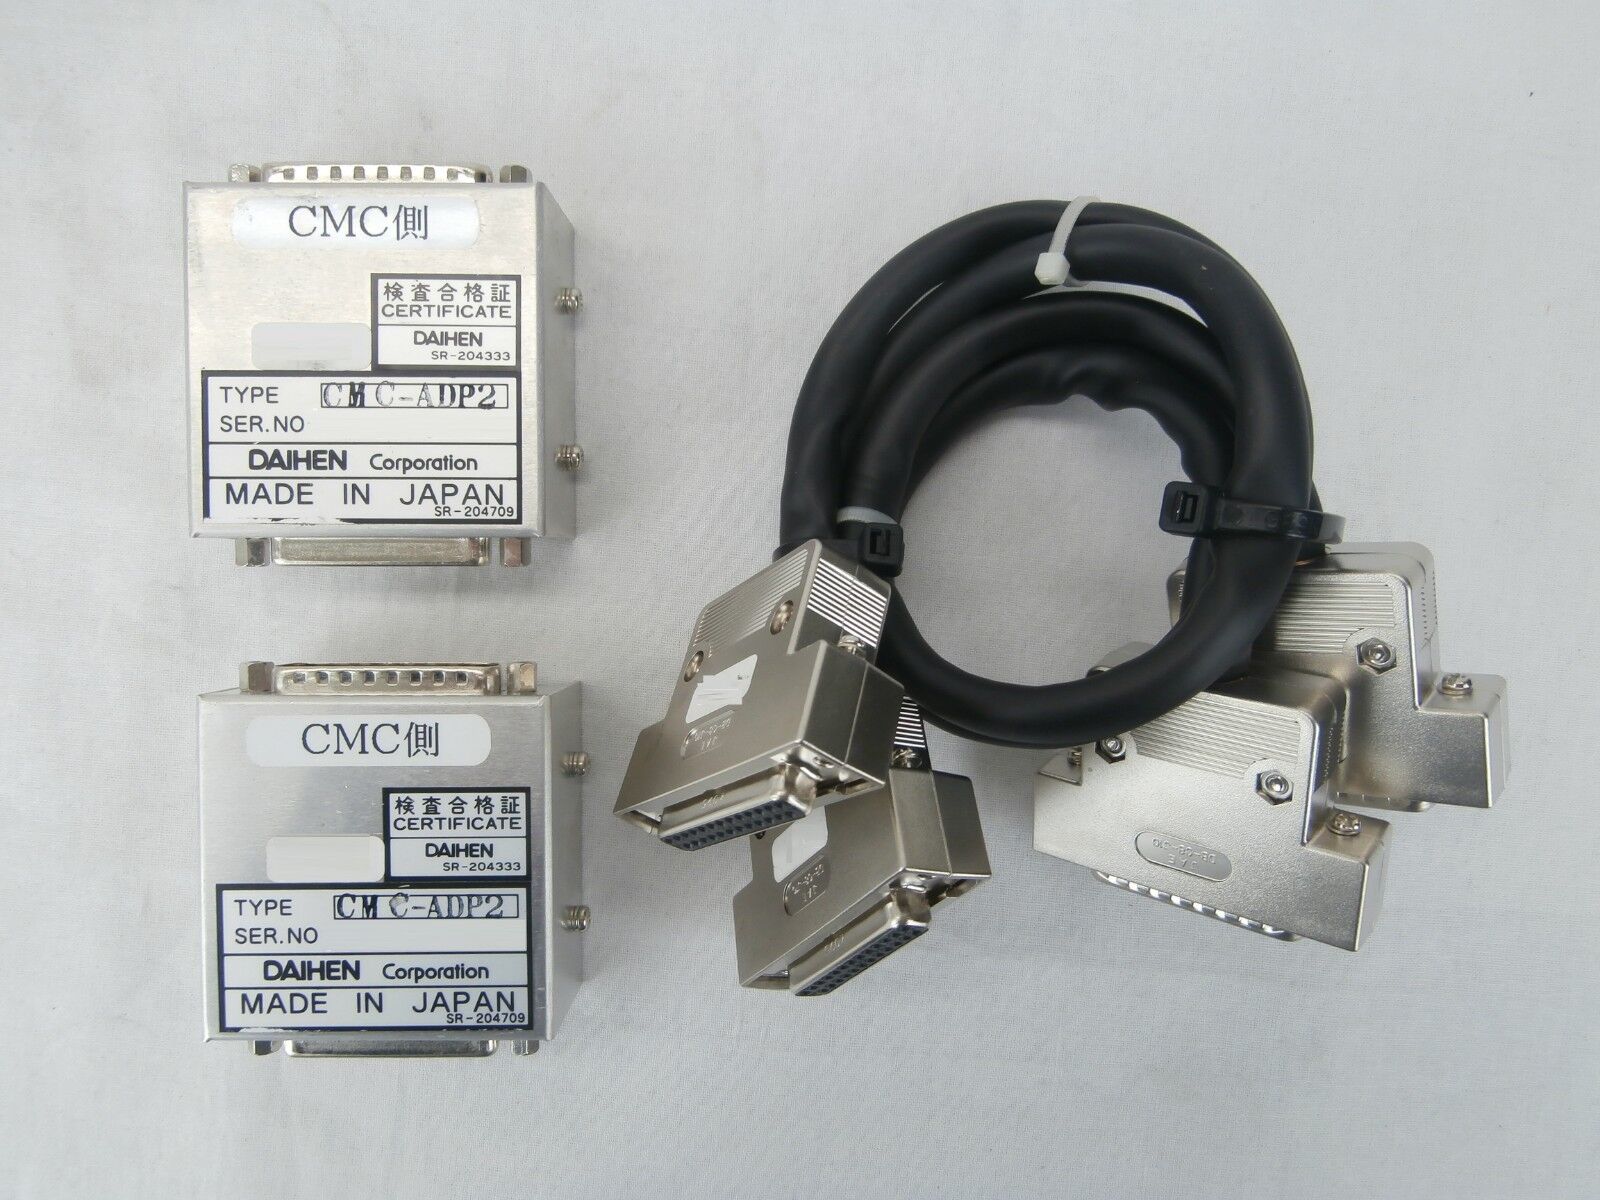 Daihen CMC-ADP2 Microwave Tuning Control Interface Reseller Lot of 2 Used